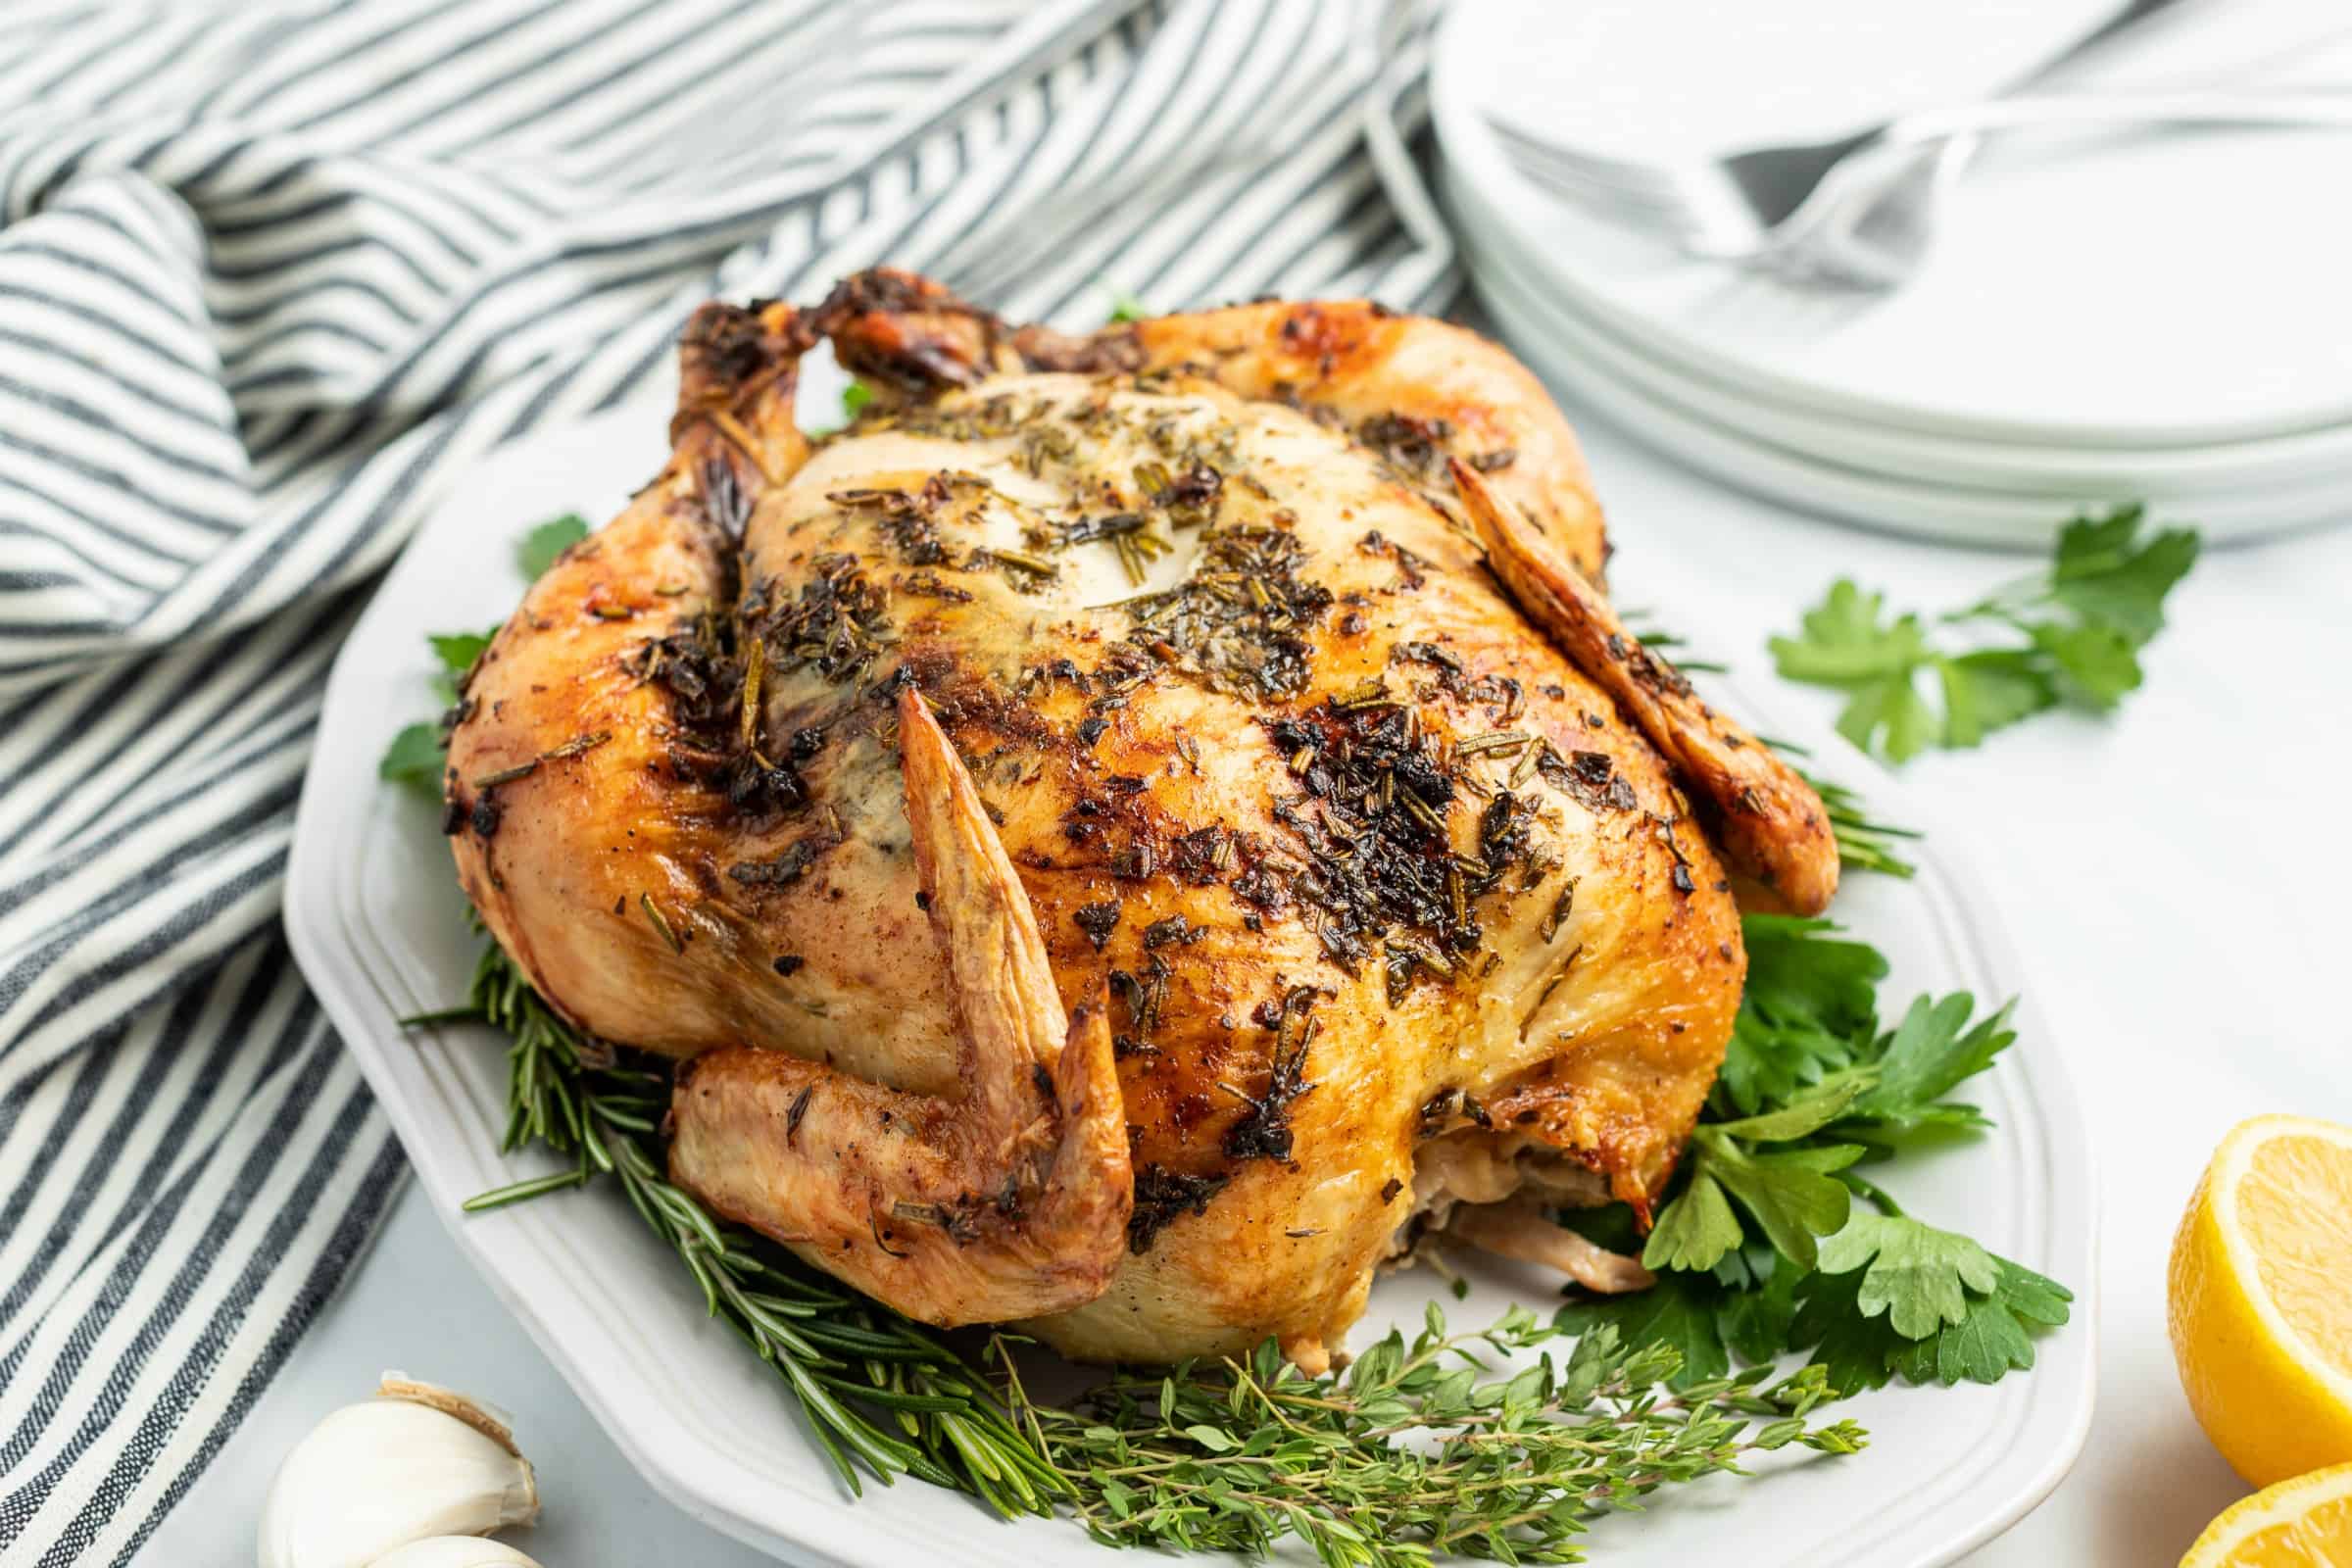 Whole chicken with garlic butter roasted on skin with fresh herbs.